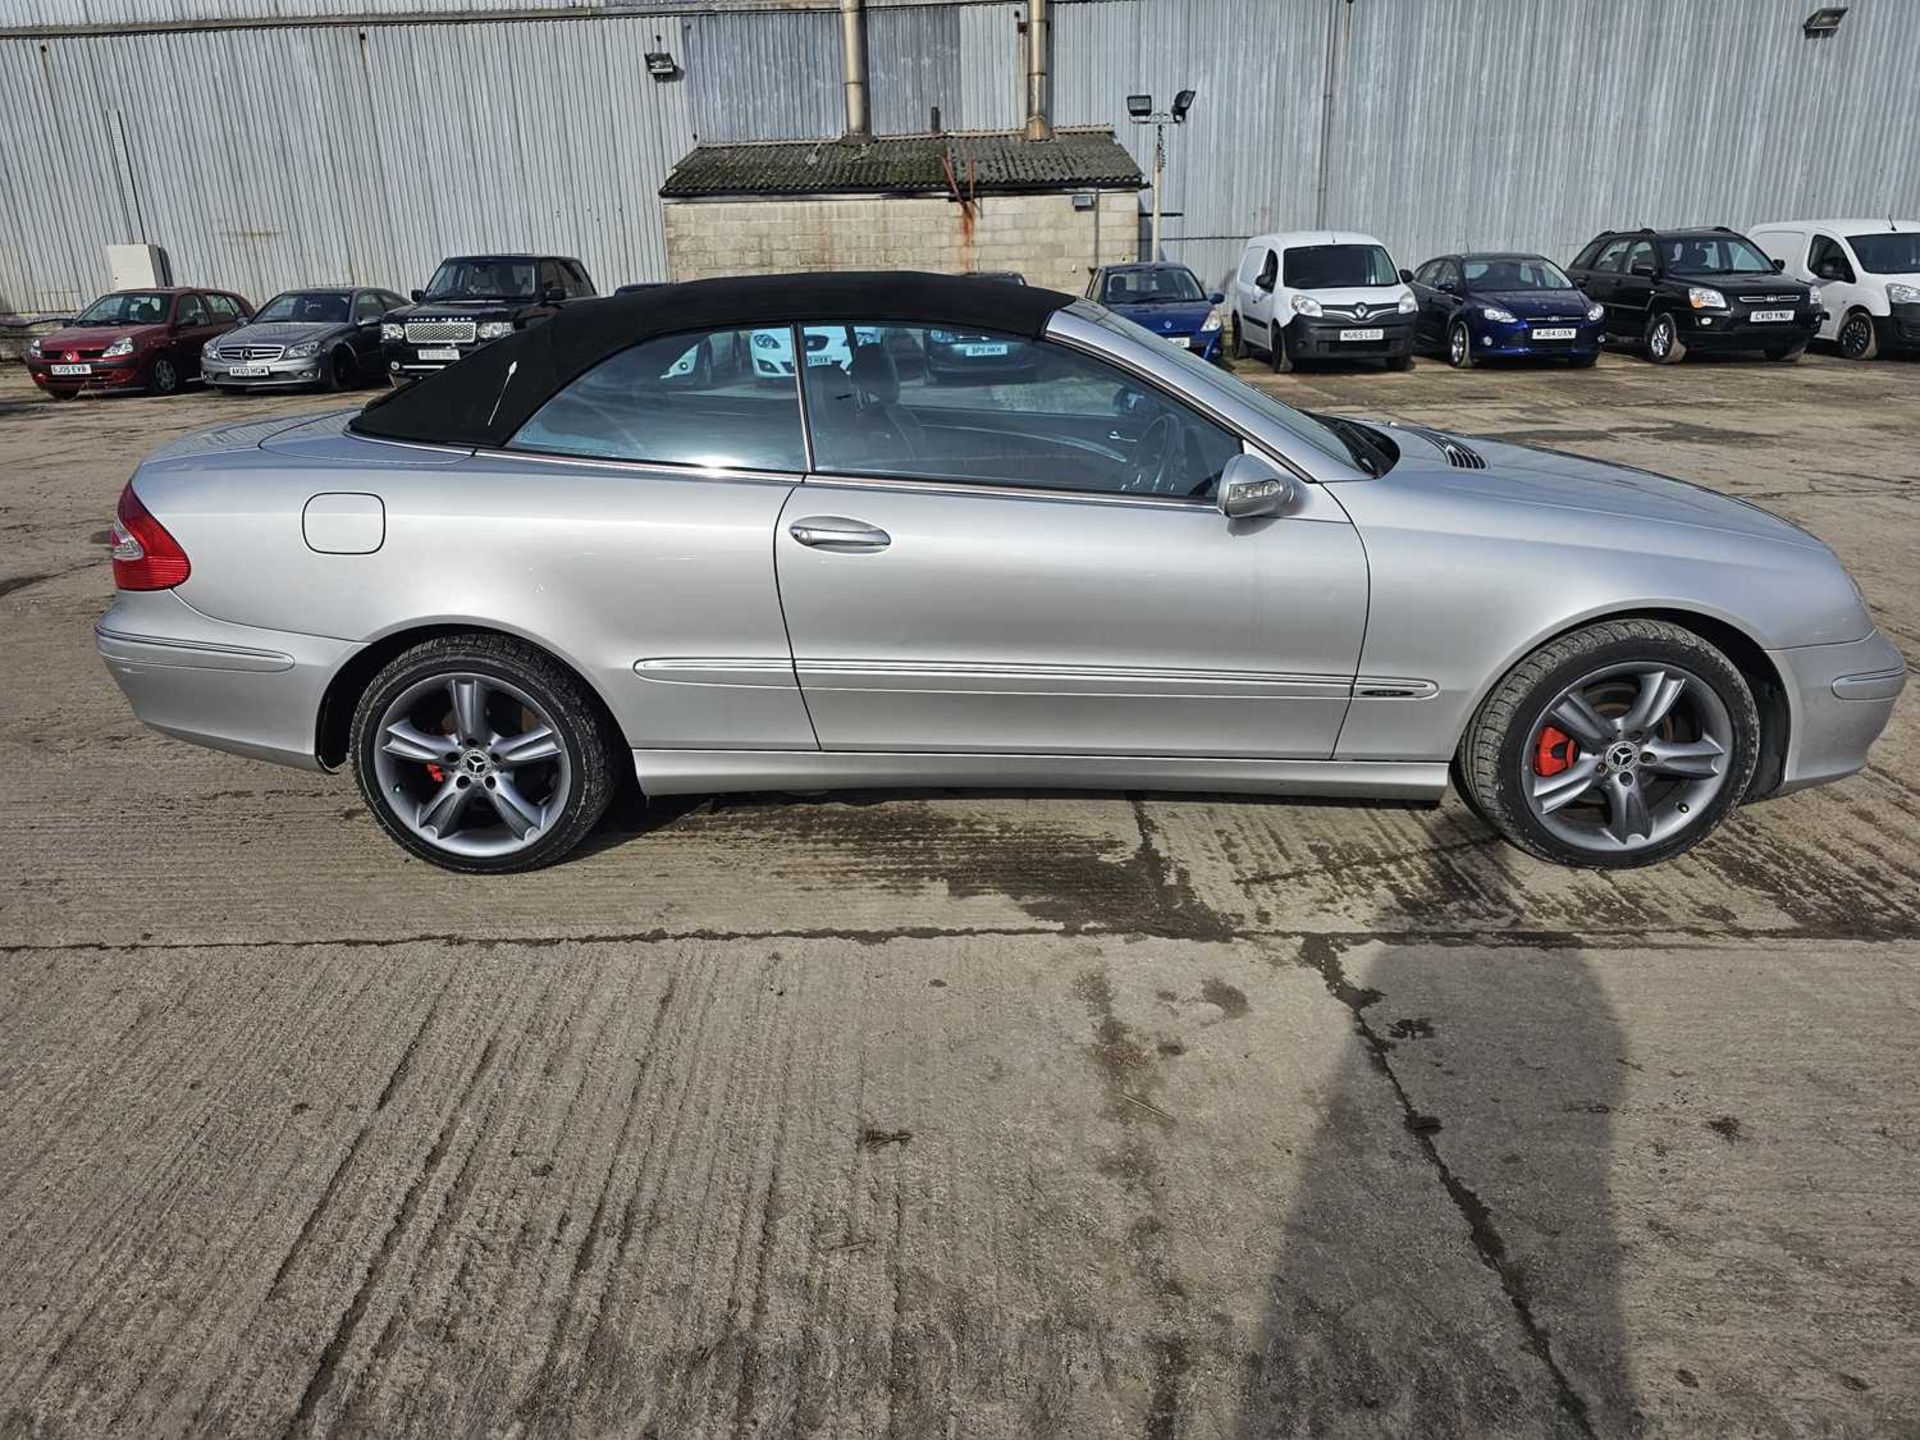 2005 Mercedes CLK200 Kompressor, Convertible, Auto, Full Leather, Bluetooth, Cruise Control, Climate - Image 7 of 29